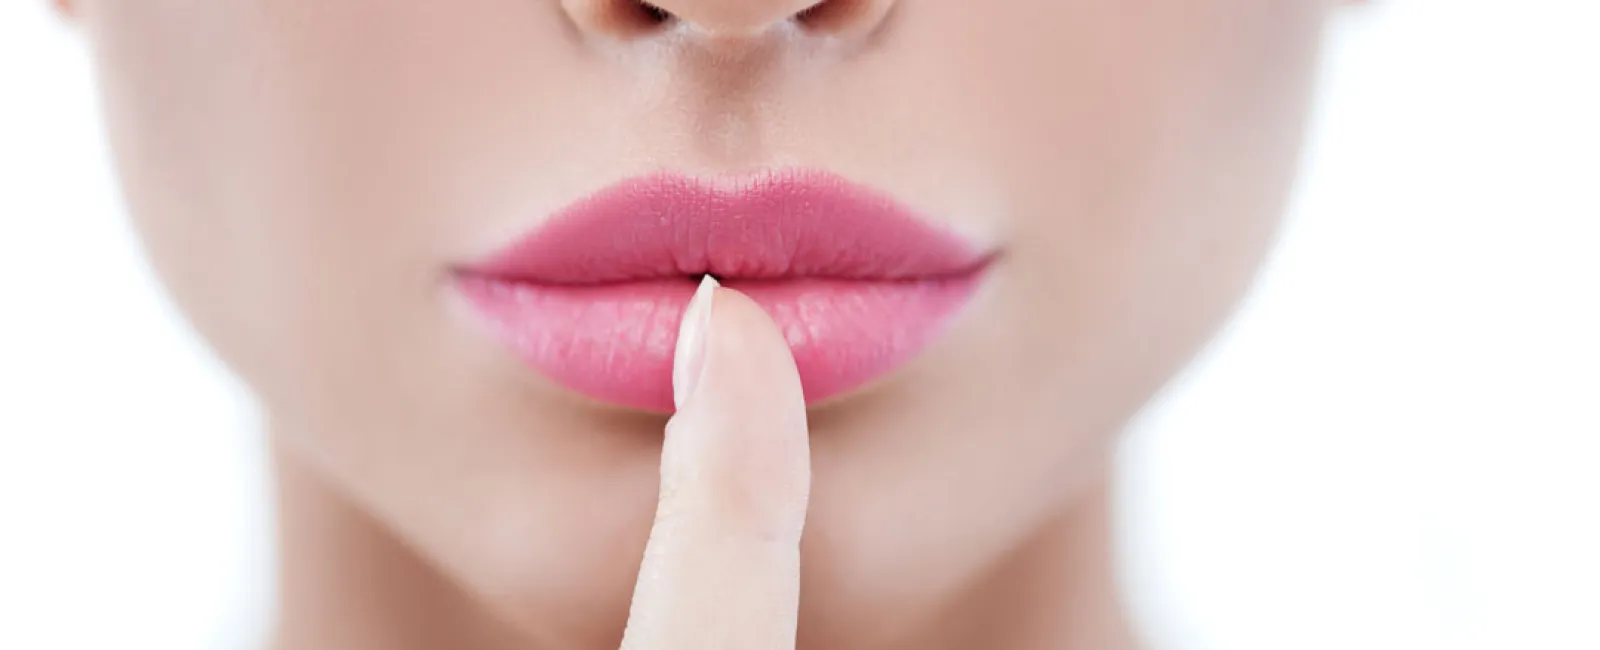 A Comprehensive Guide To Lip Enhancement